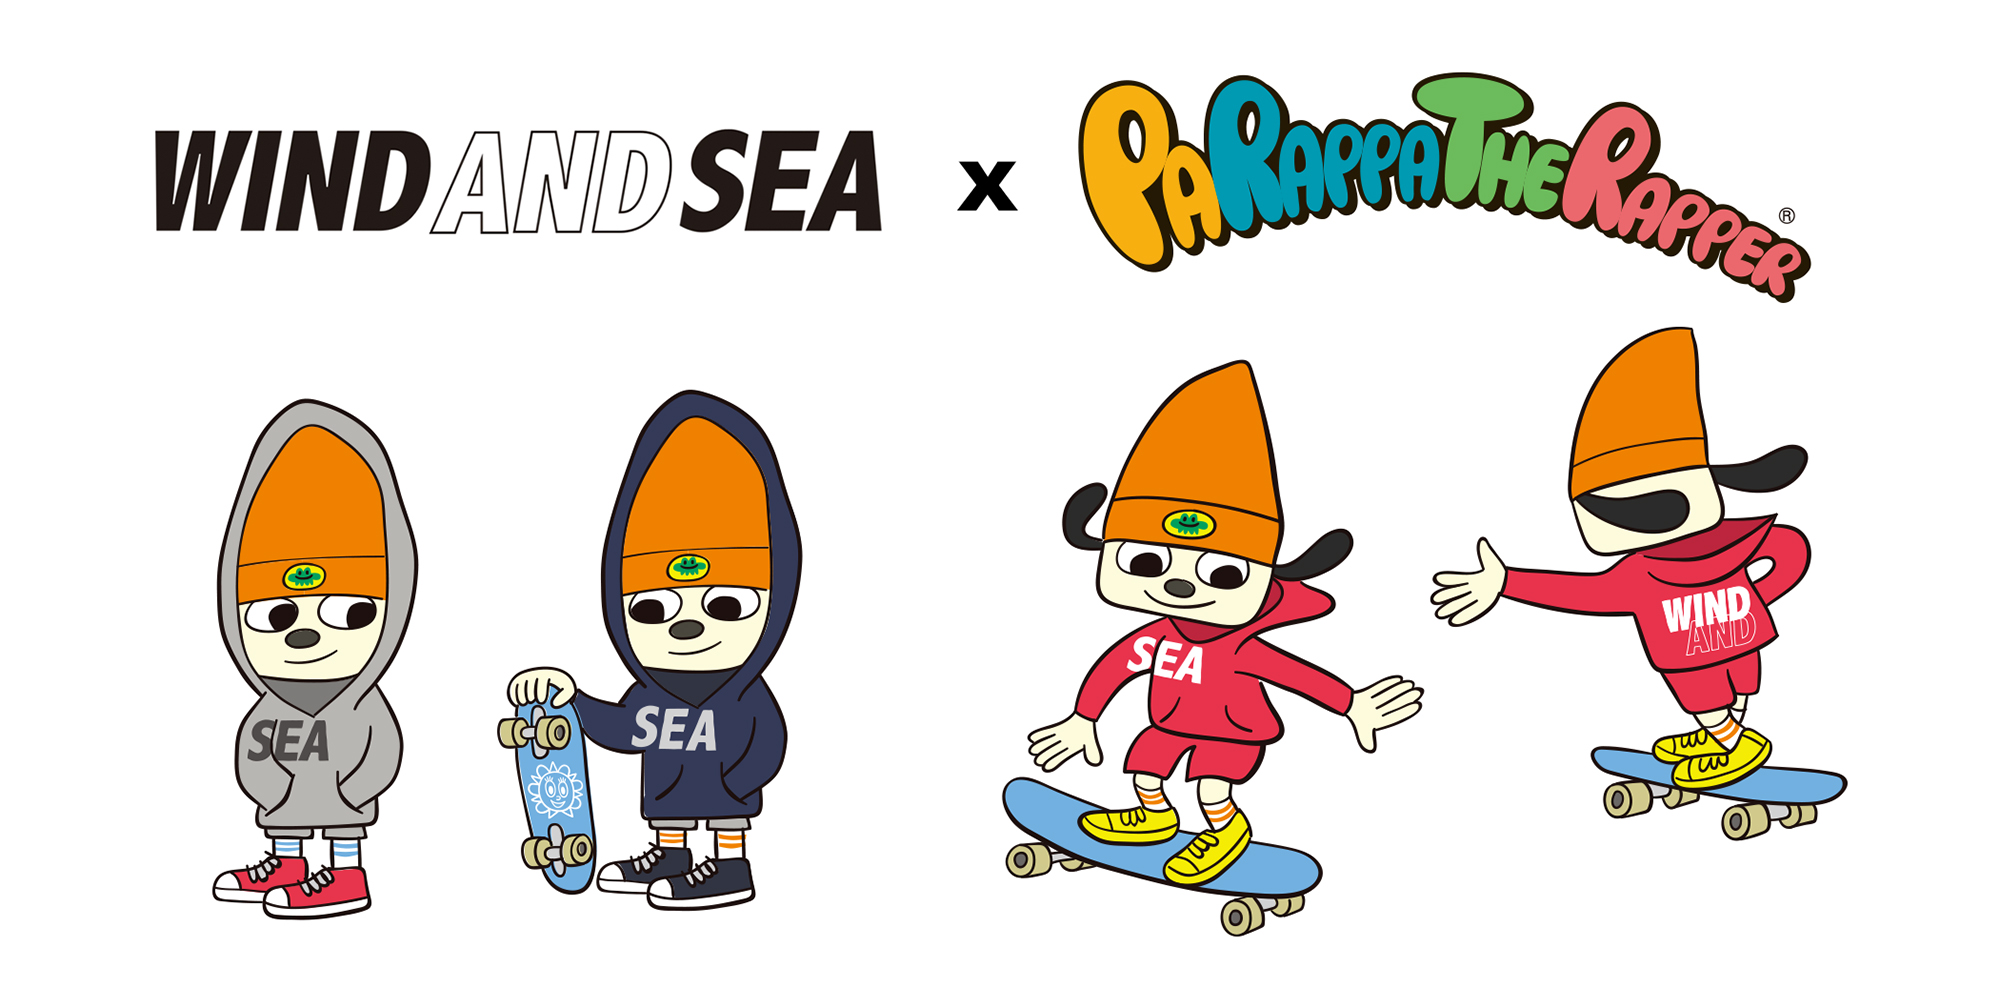 WIND AND SEA x PARAPPA THE RAPPER コラボ第2弾 描き下ろし 